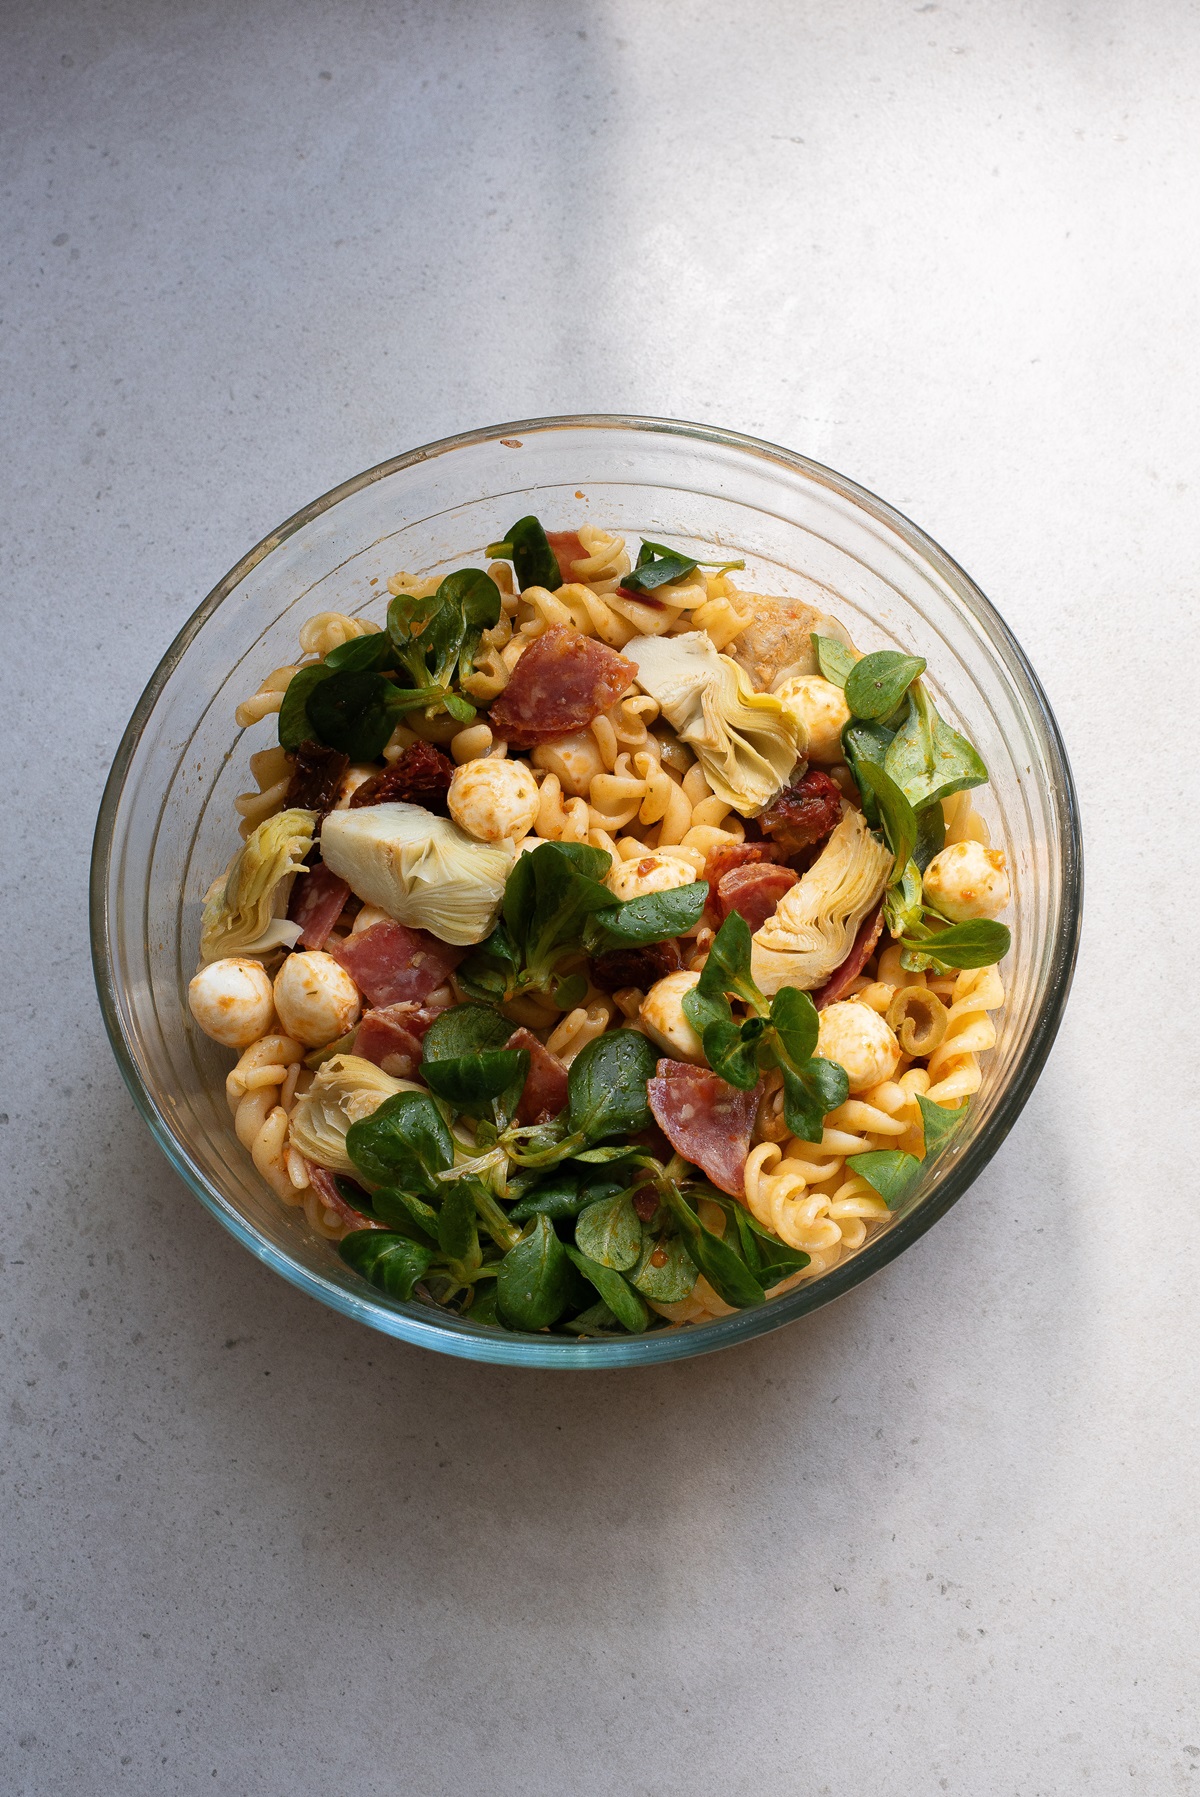 Pasta salad with dressing on it.